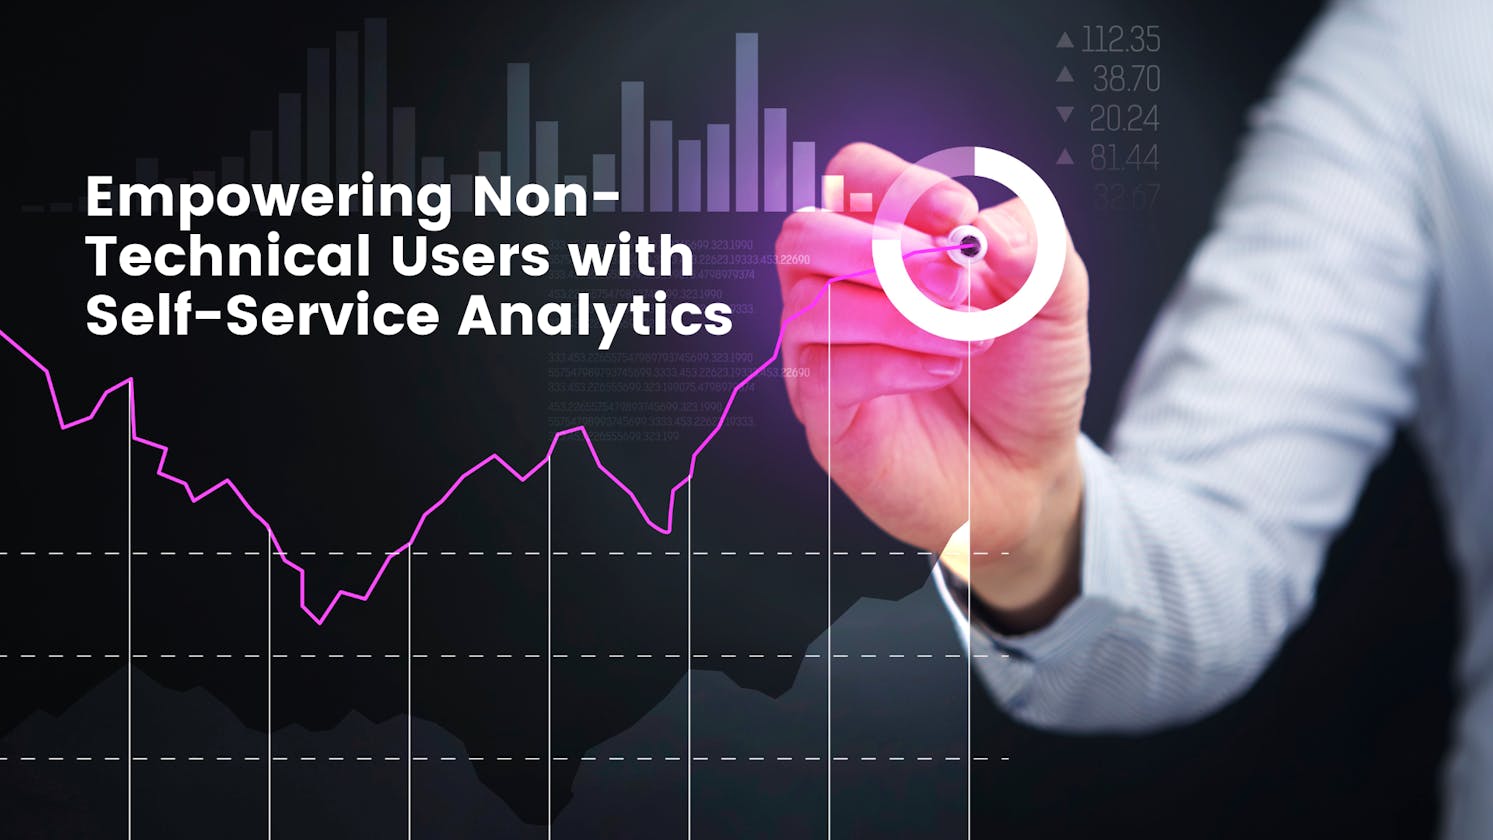 Empowering Non-Technical Users with Self-Service Analytics